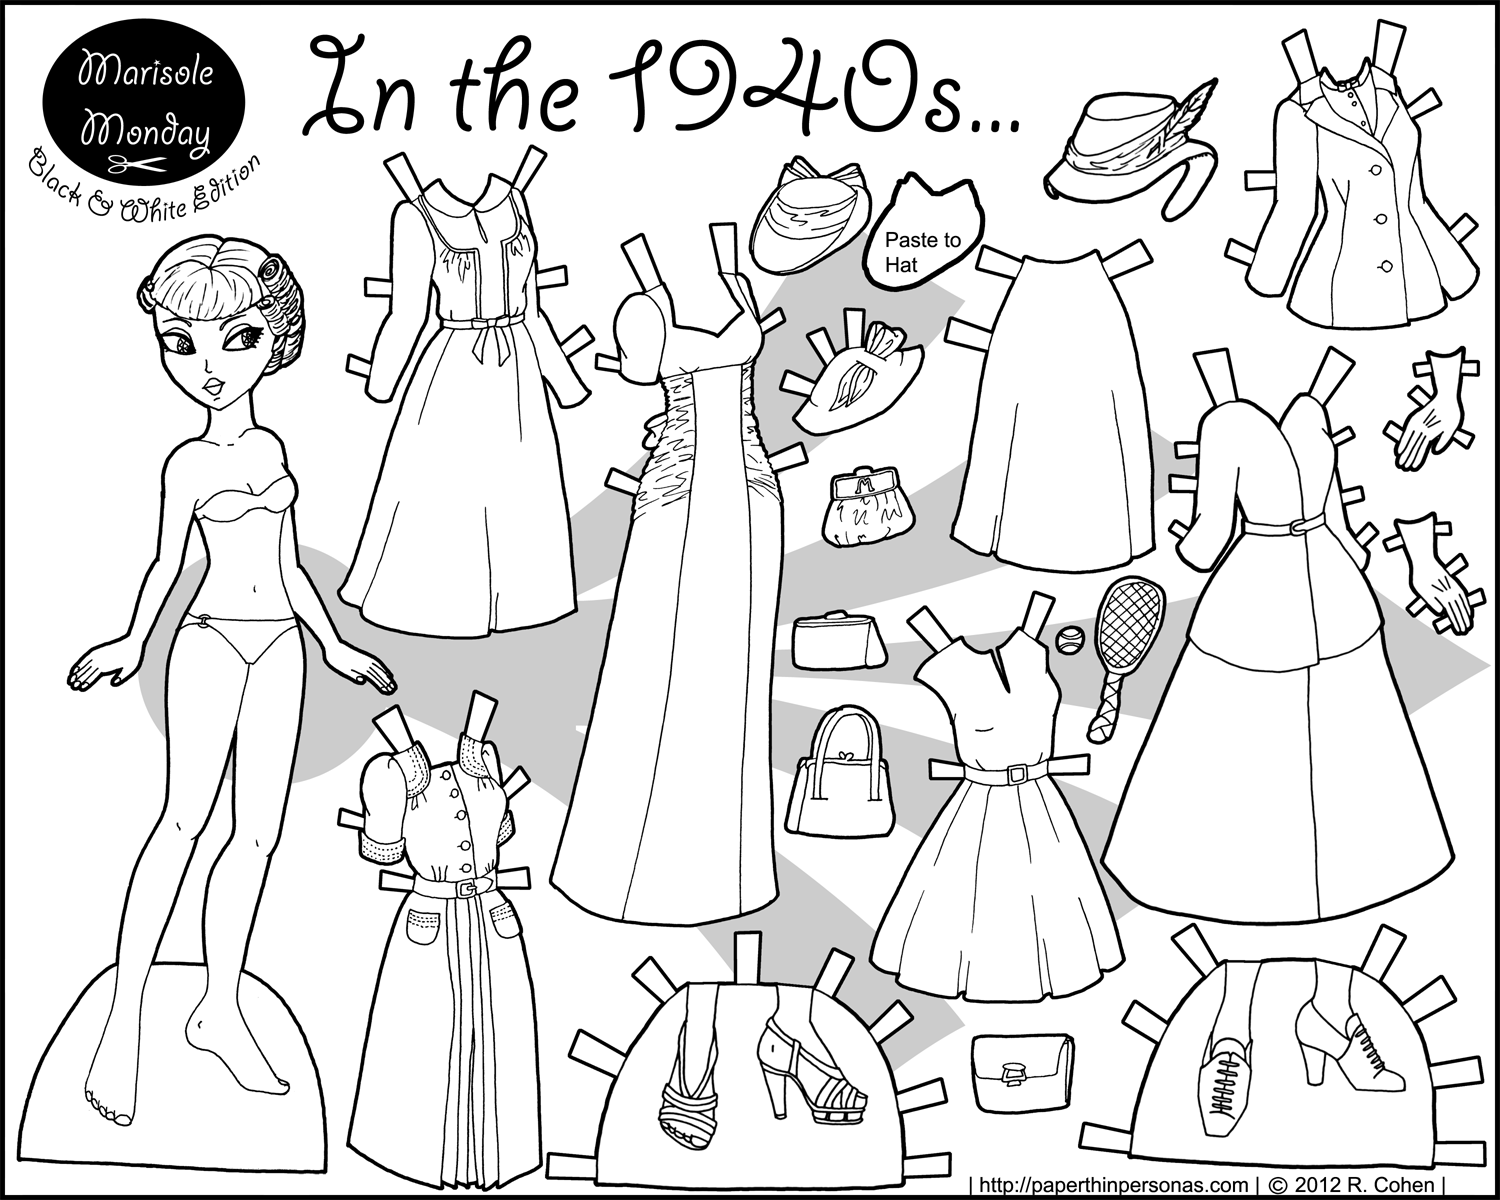 Top 12 Magnificent Paper Doll Coloring Pages Marisole Monday Luxury Best Fo...